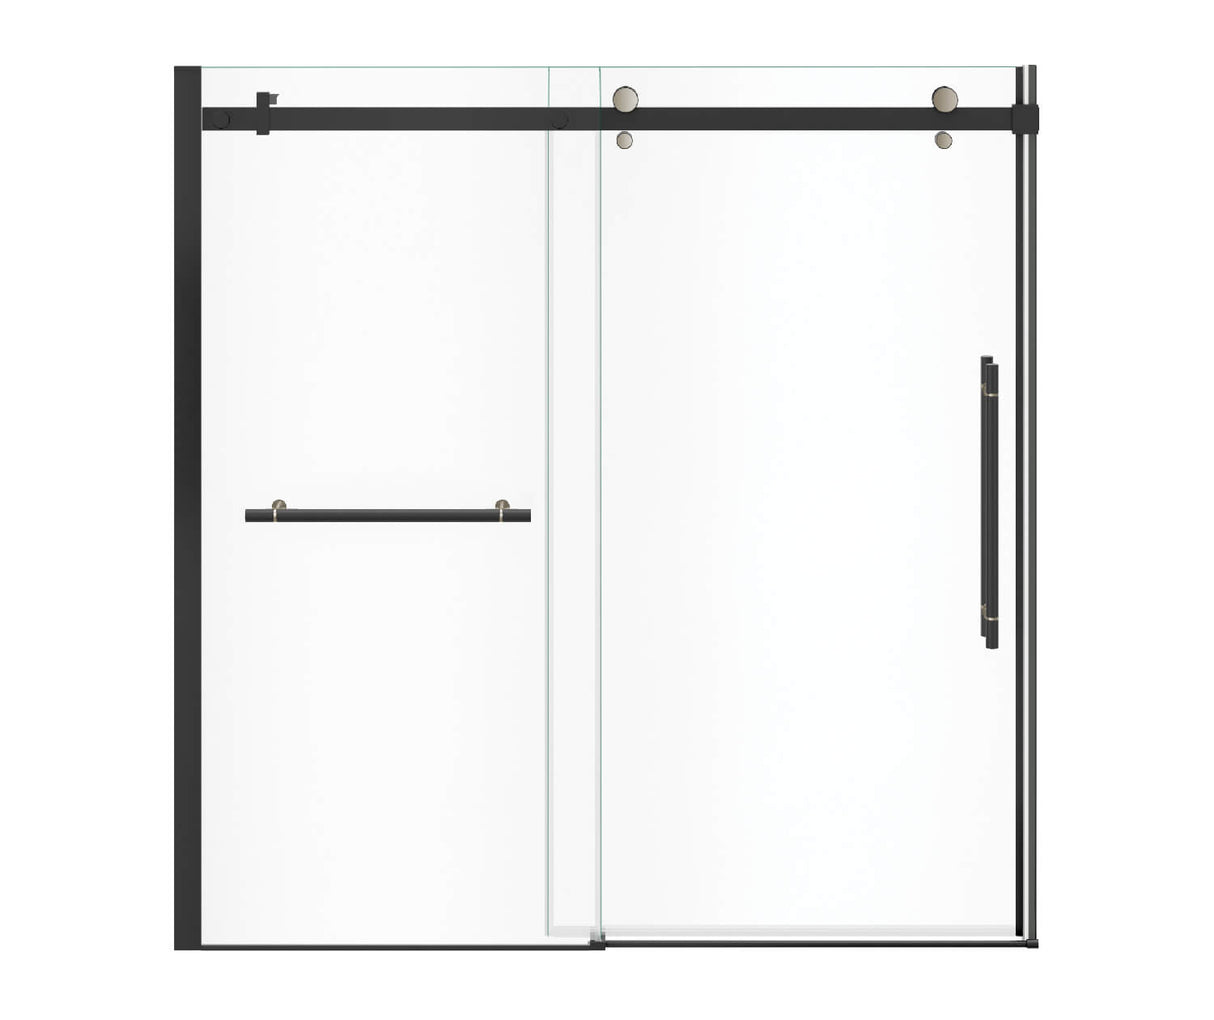 MAAX 138485-900-370-000 Vela 56 ½-59 x 59 in. 8 mm Sliding Tub Door with Towel Bar for Alcove Installation with Clear glass in Matte Black and Brushed Nickel